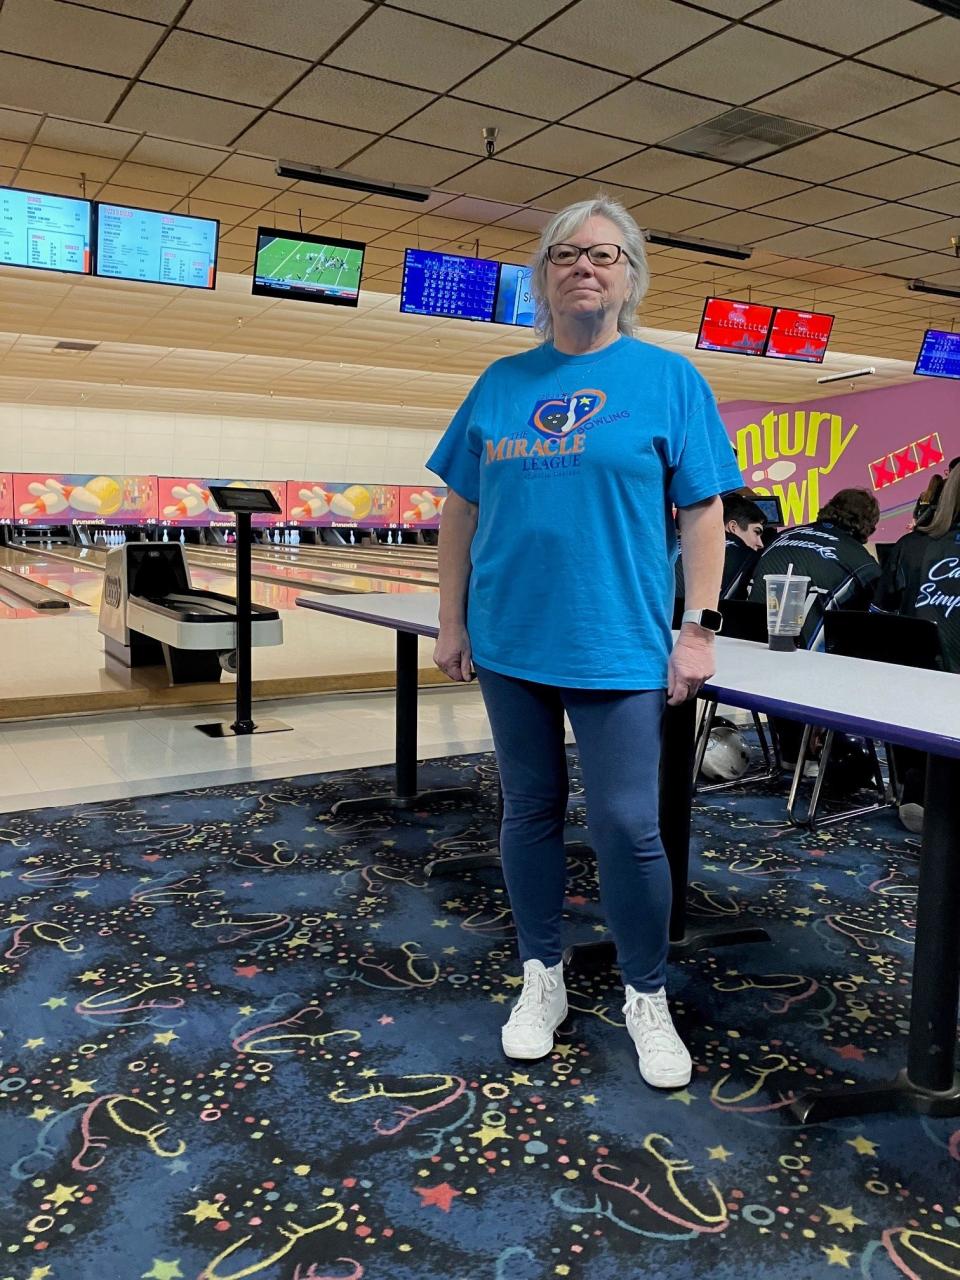 Susie Glasgow of Miracle League of North Oakland returned on Tuesday to Century Bowl, where over the weekend $350 in cash and a $210 check were taken during an event the group hosted for children with special needs.